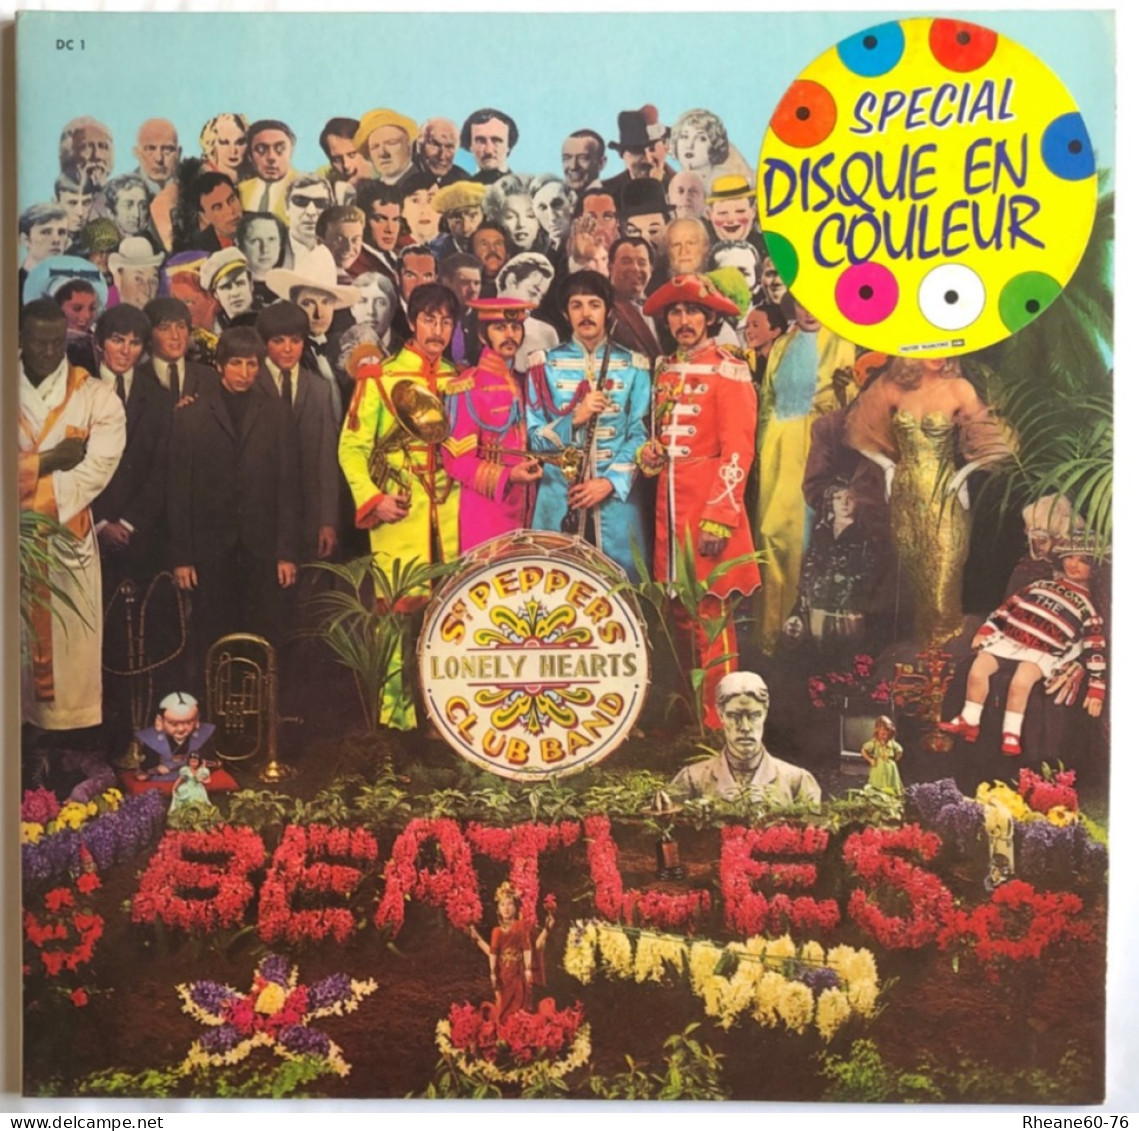 EMI Parlophone - C 066 04 177 - The Beatles - Disque Rouge - Sgt Pepper's Lonely Hearts Club Band - DC1 - Other - English Music